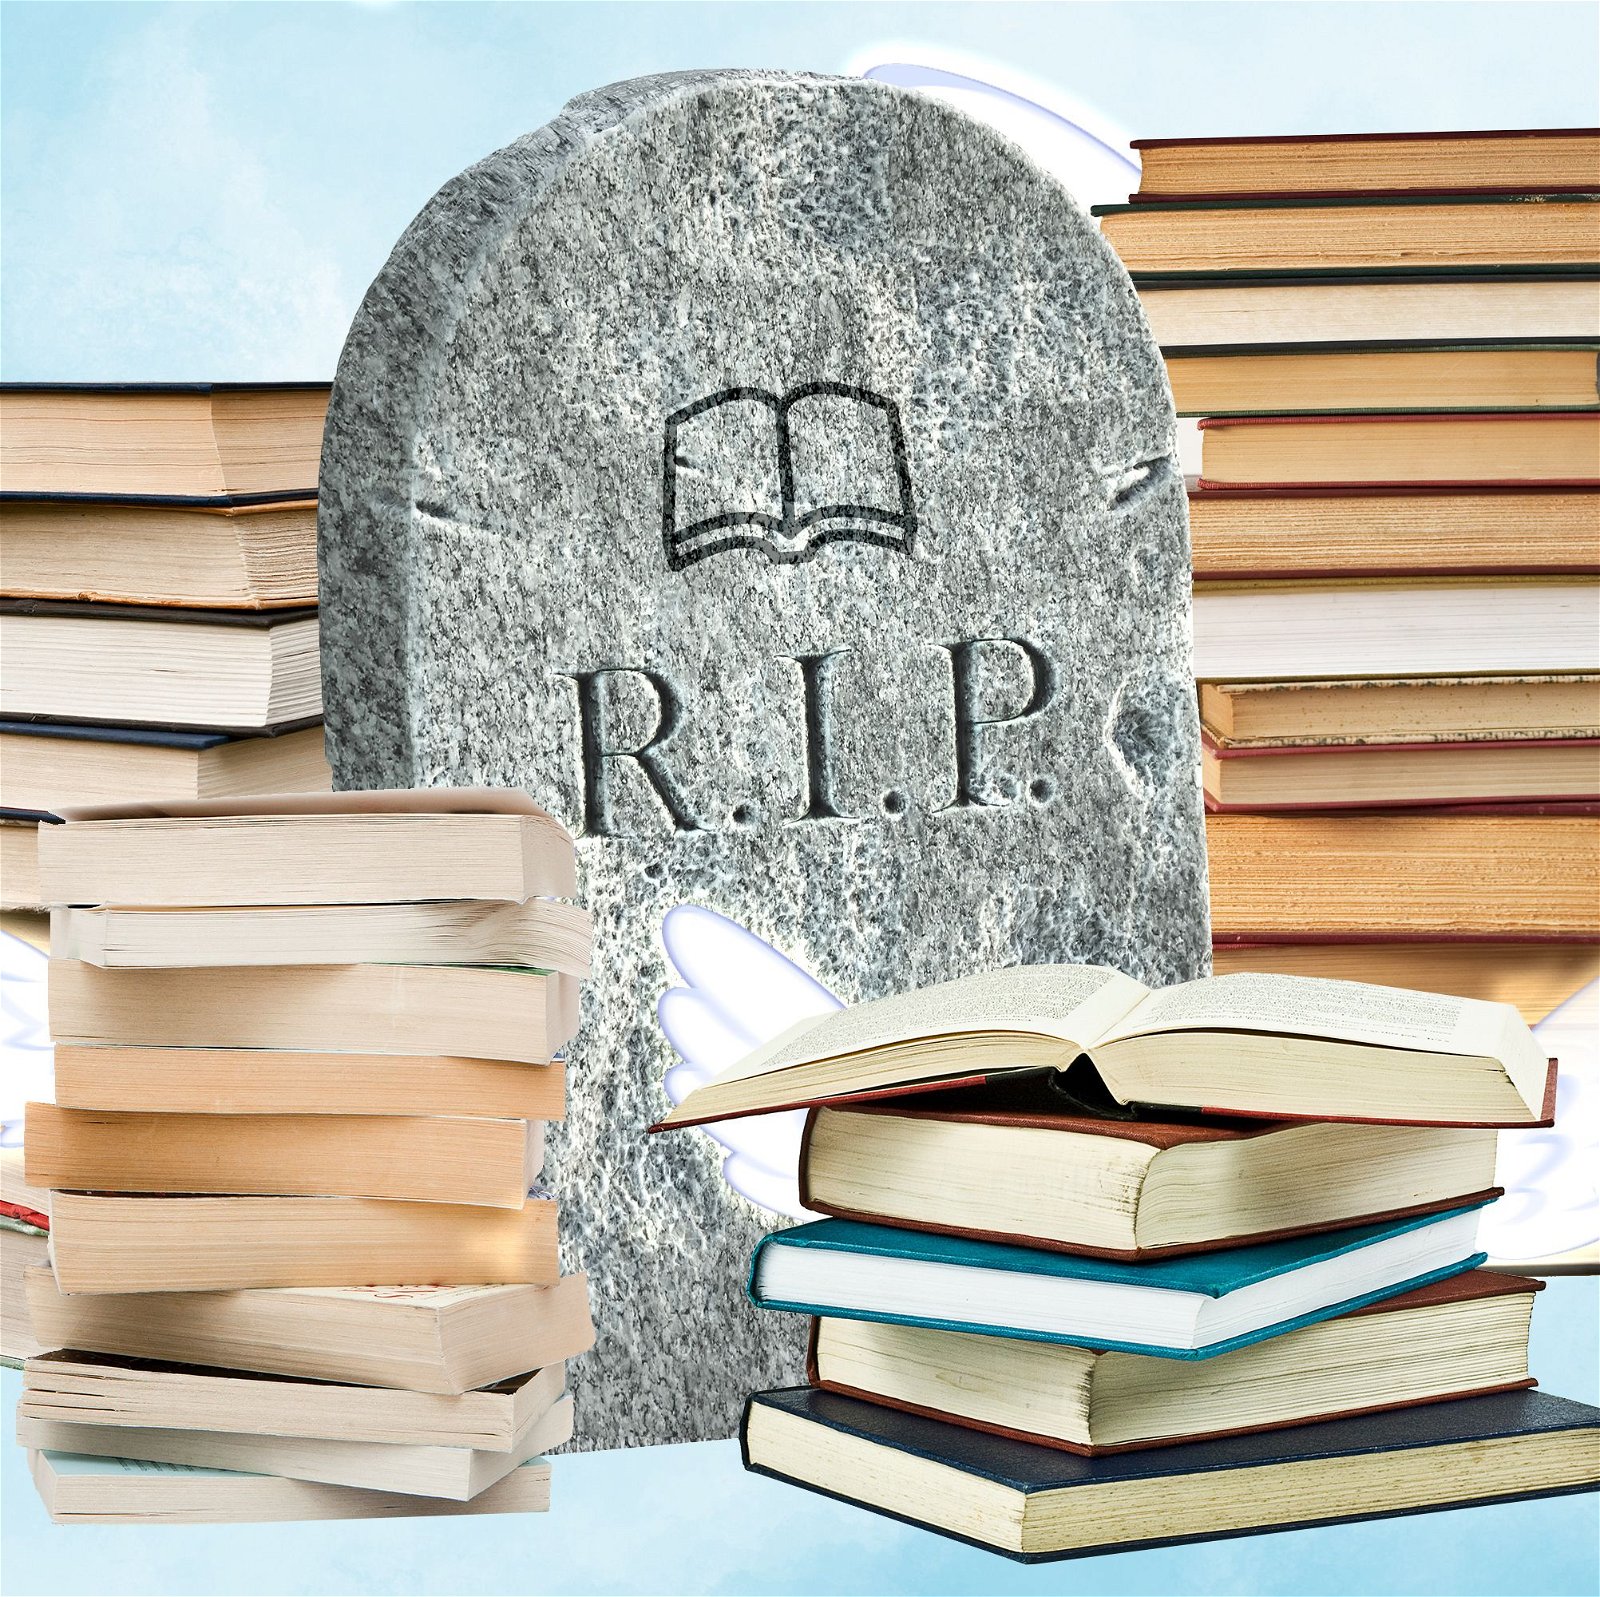 Is It A Betrayal To Publish Dead Writers' Books?